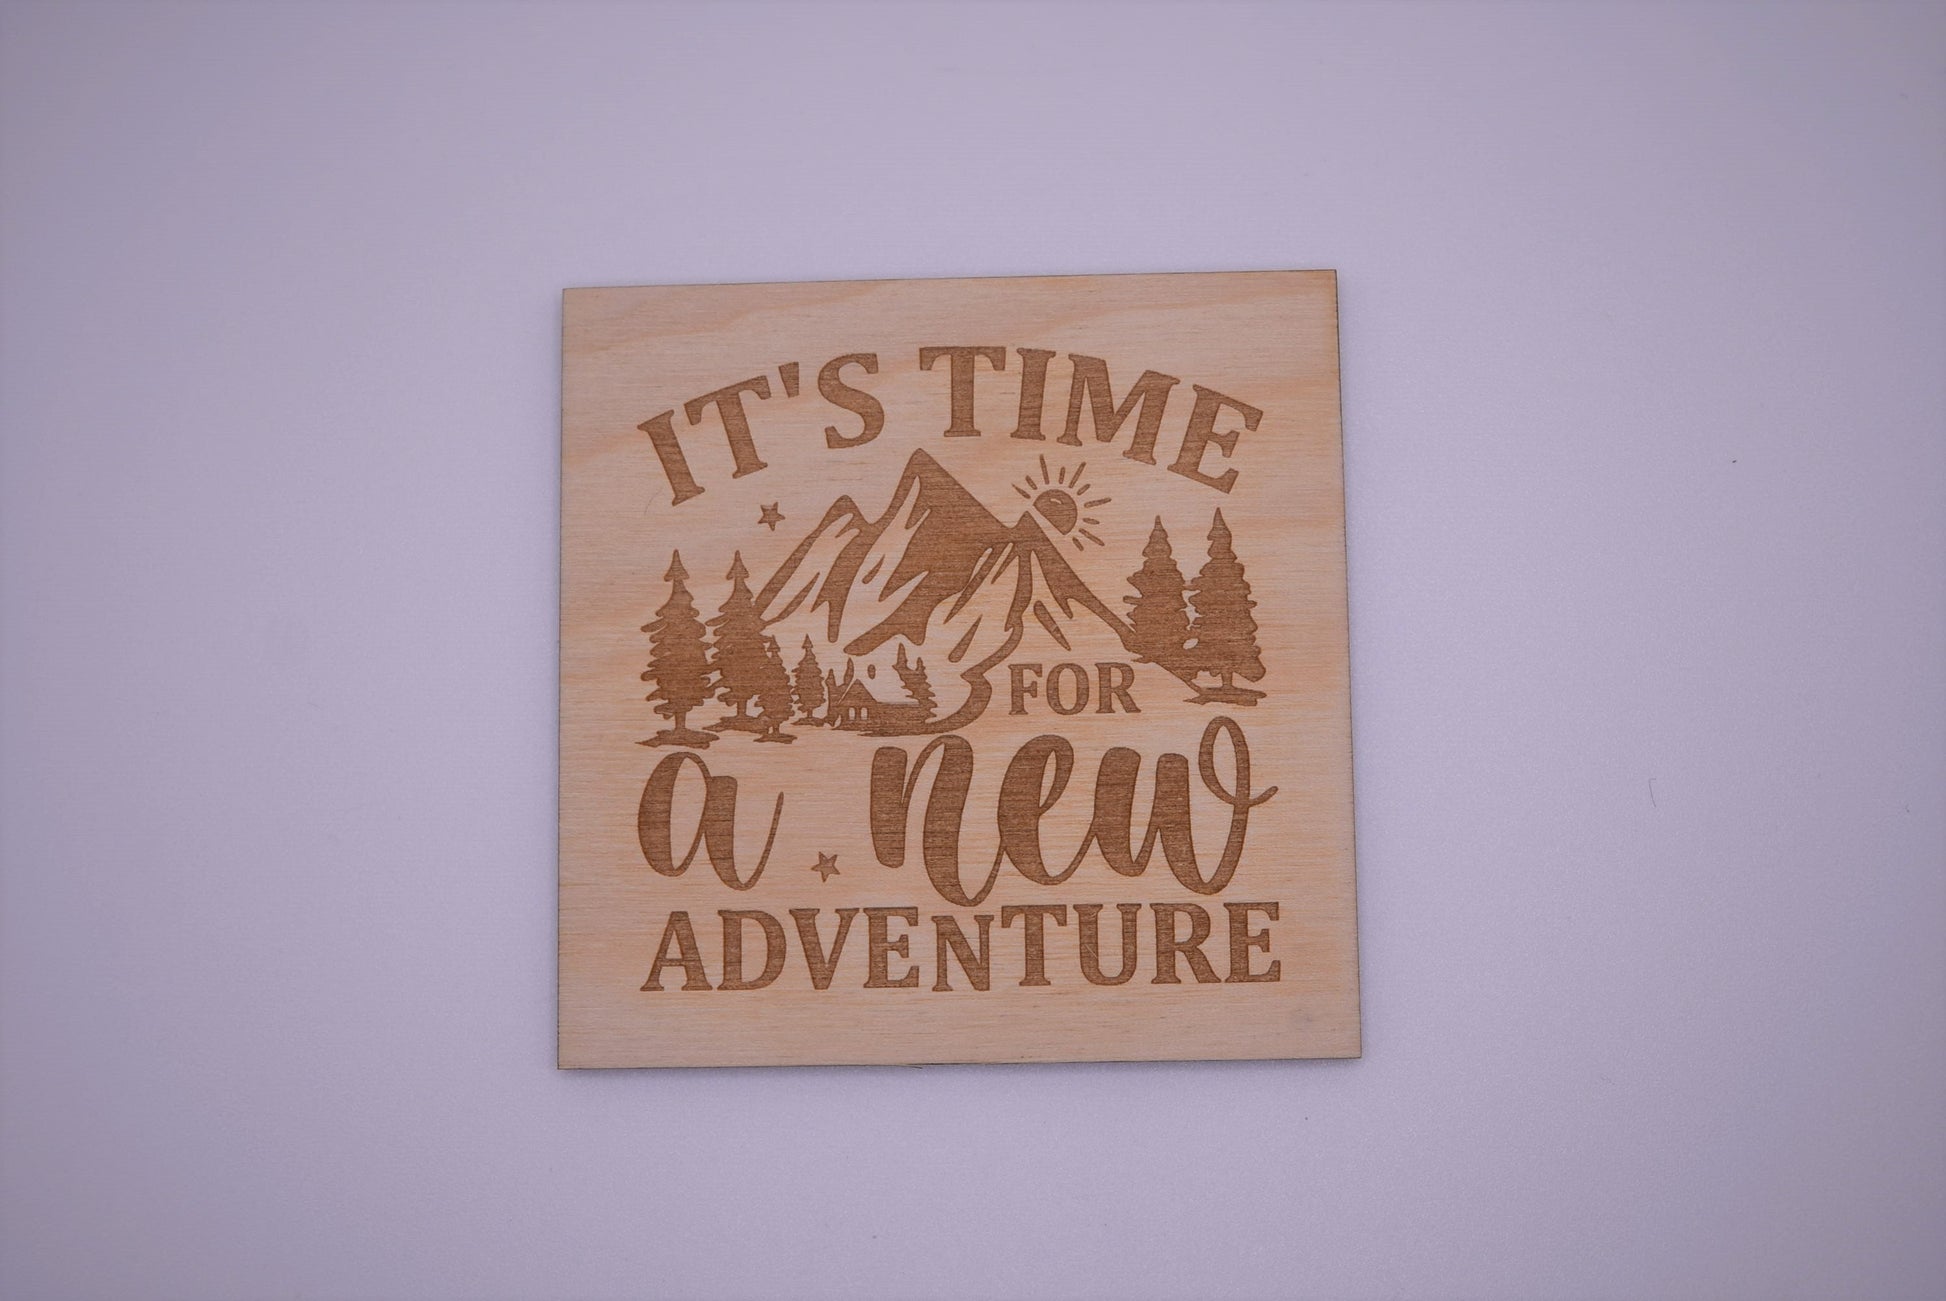 It's time for a new adventure - Creative Designs By Kari